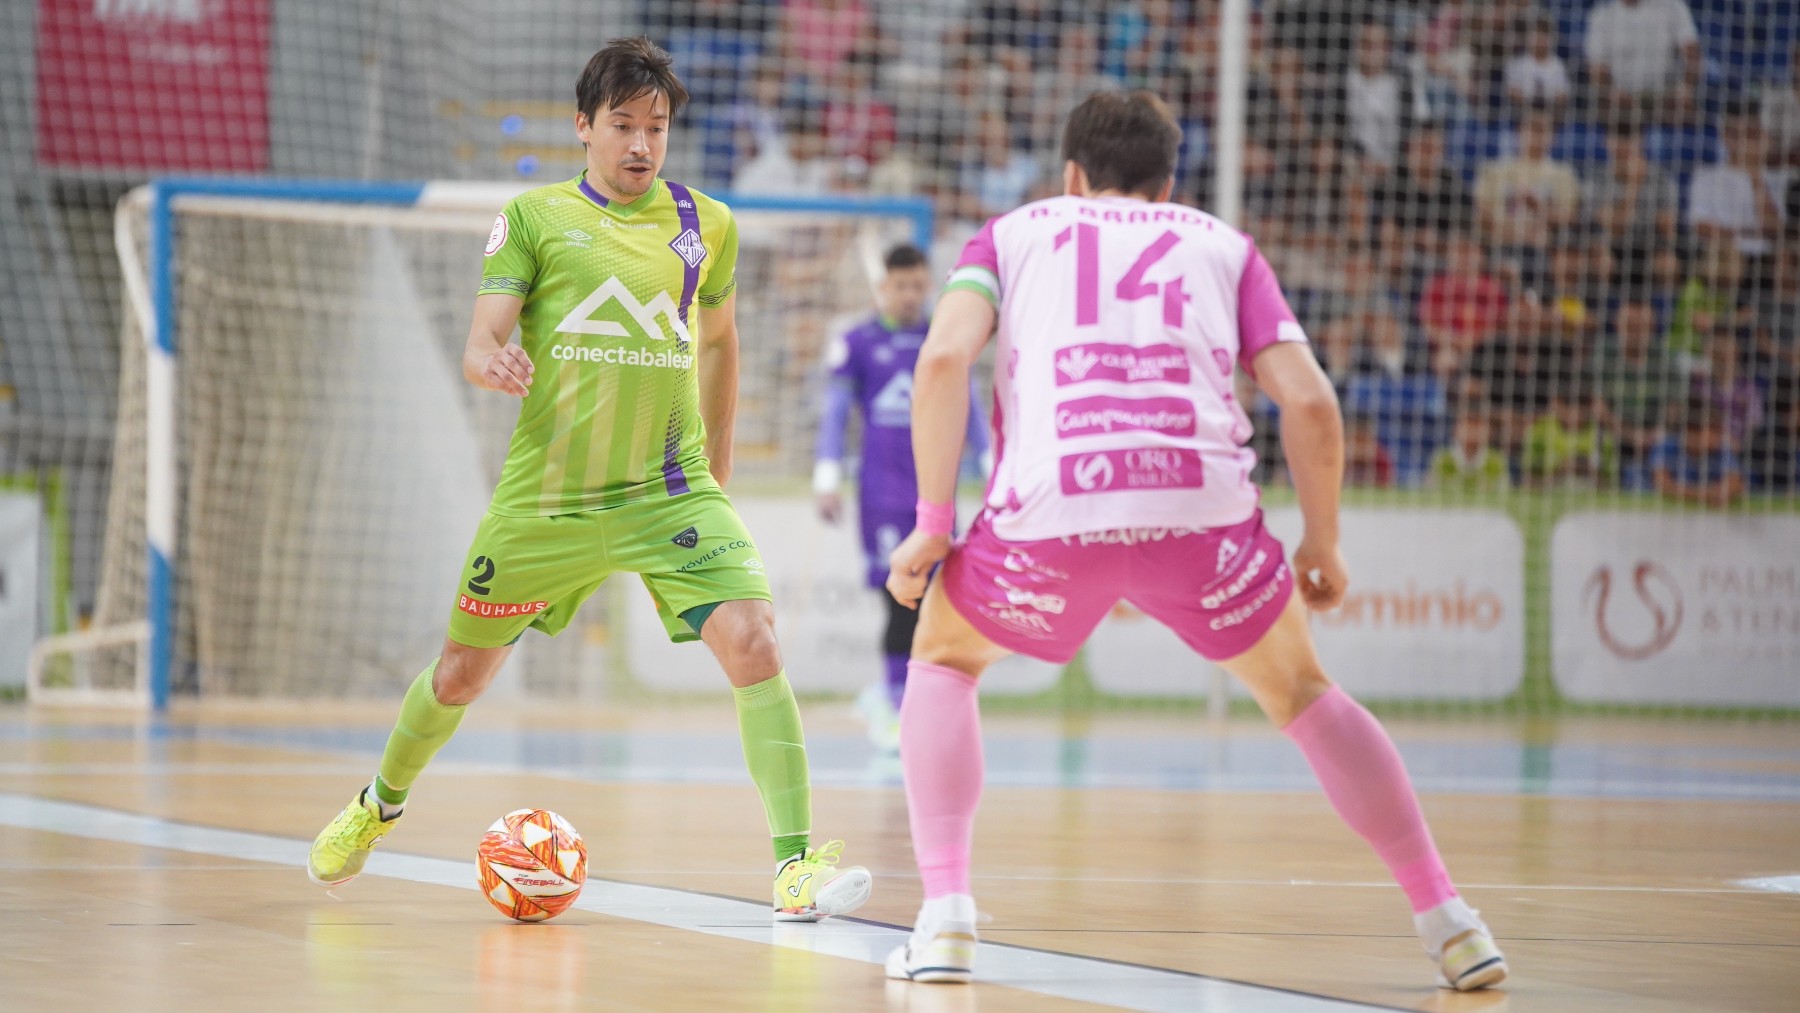 2-5.  Jaén attacks Son Moix at the worst moment